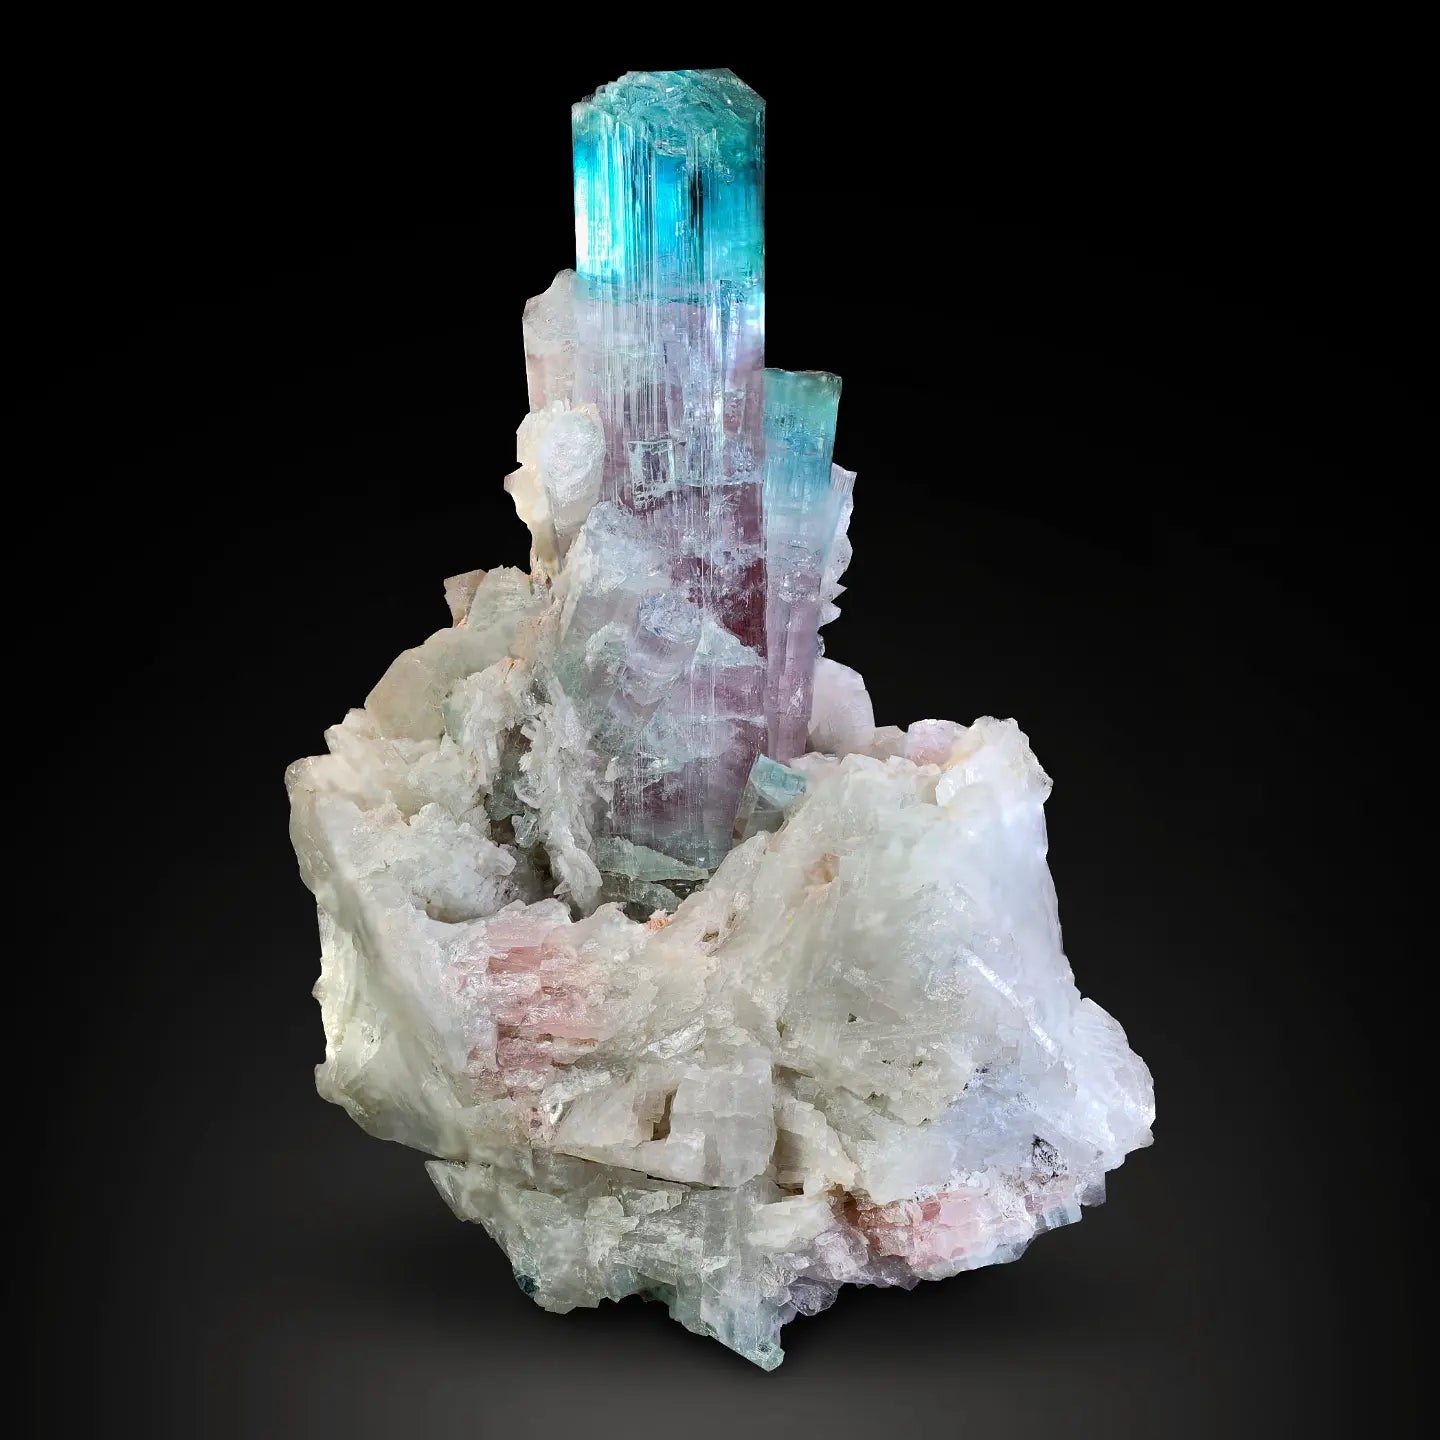 Aristocratic Bicolor Tourmaline Crystal with Indicolite Blue and Rubelite colors from Afghanistan